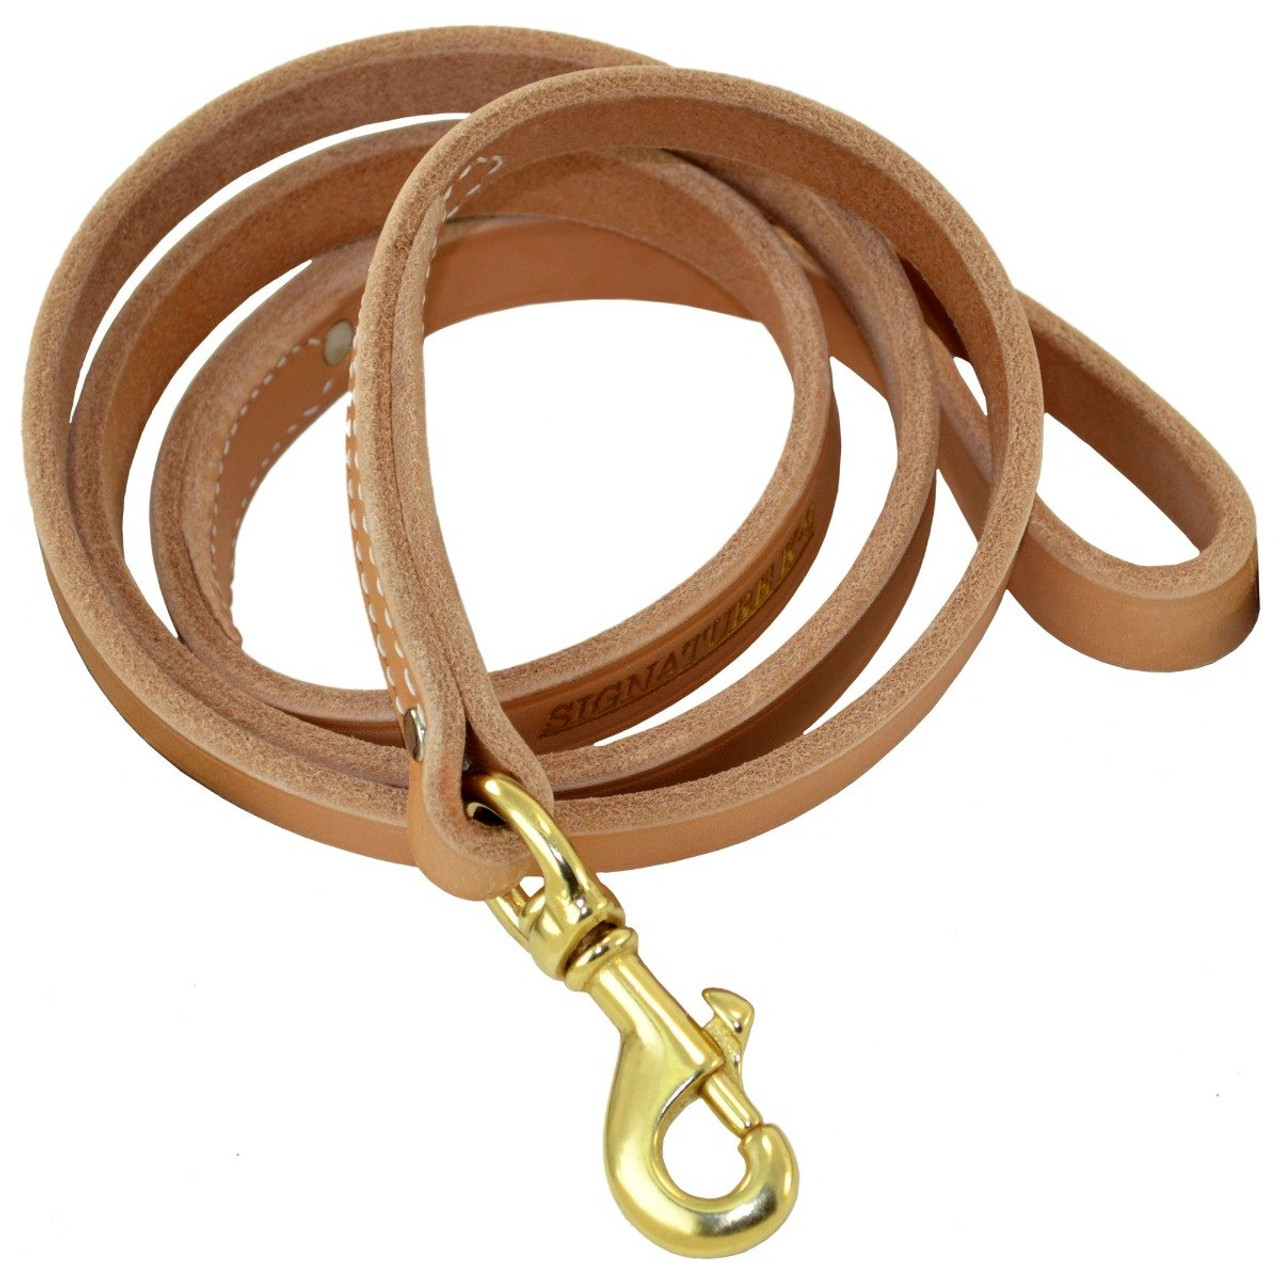 Oiled Leather Leash  K9 Exclusive - Ray Allen Manufacturing